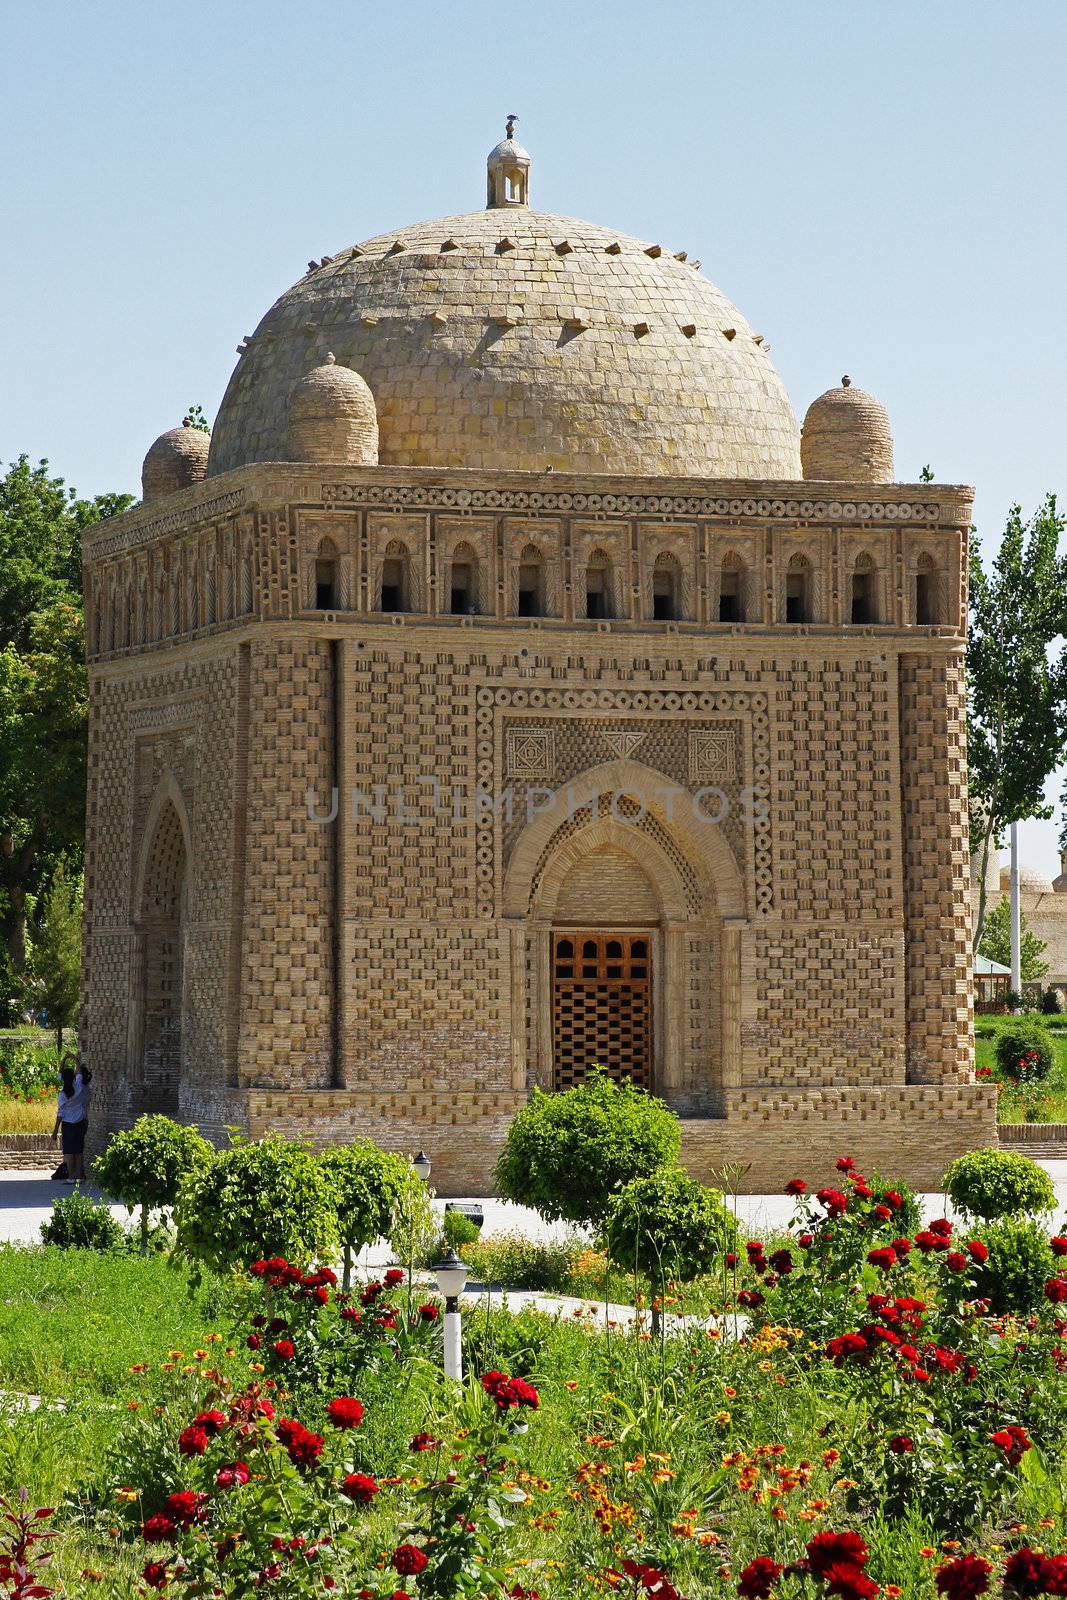 Samanida Mausoleum, one of the oldest and pompousest tombs in the middle east, Bukhara, Uzbekistan